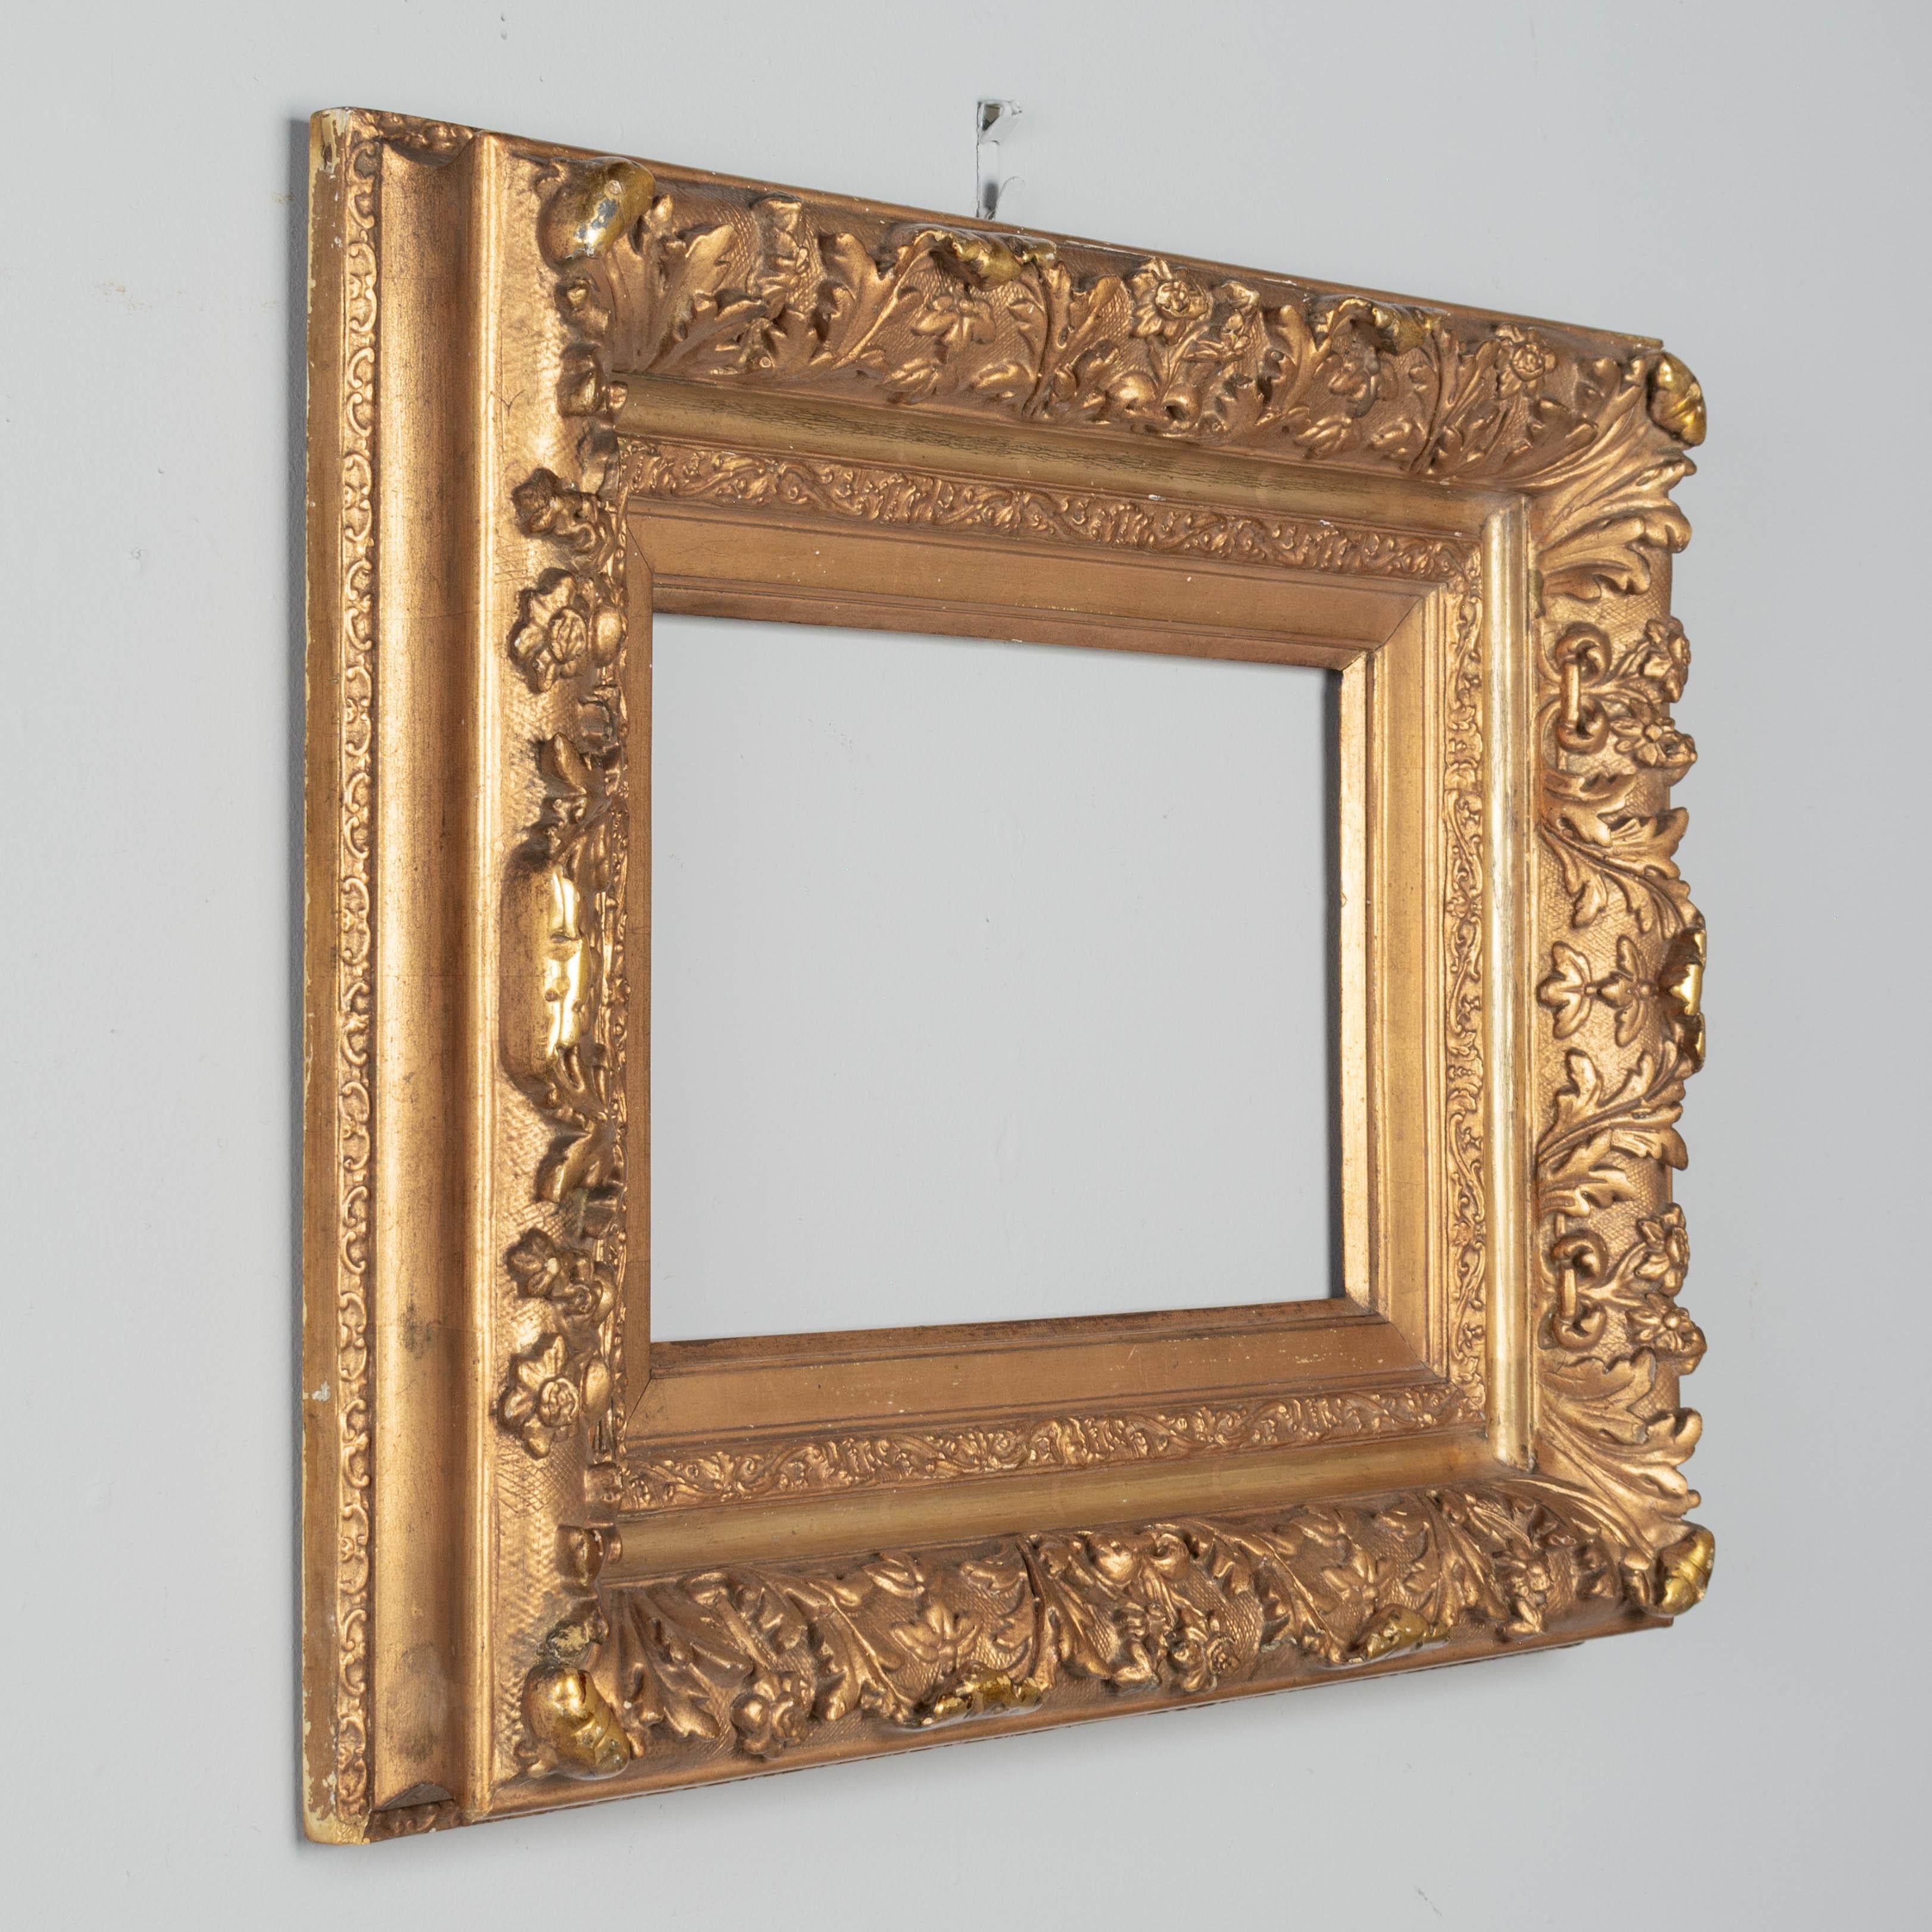 19th Century French Giltwood Frame In Good Condition For Sale In Winter Park, FL